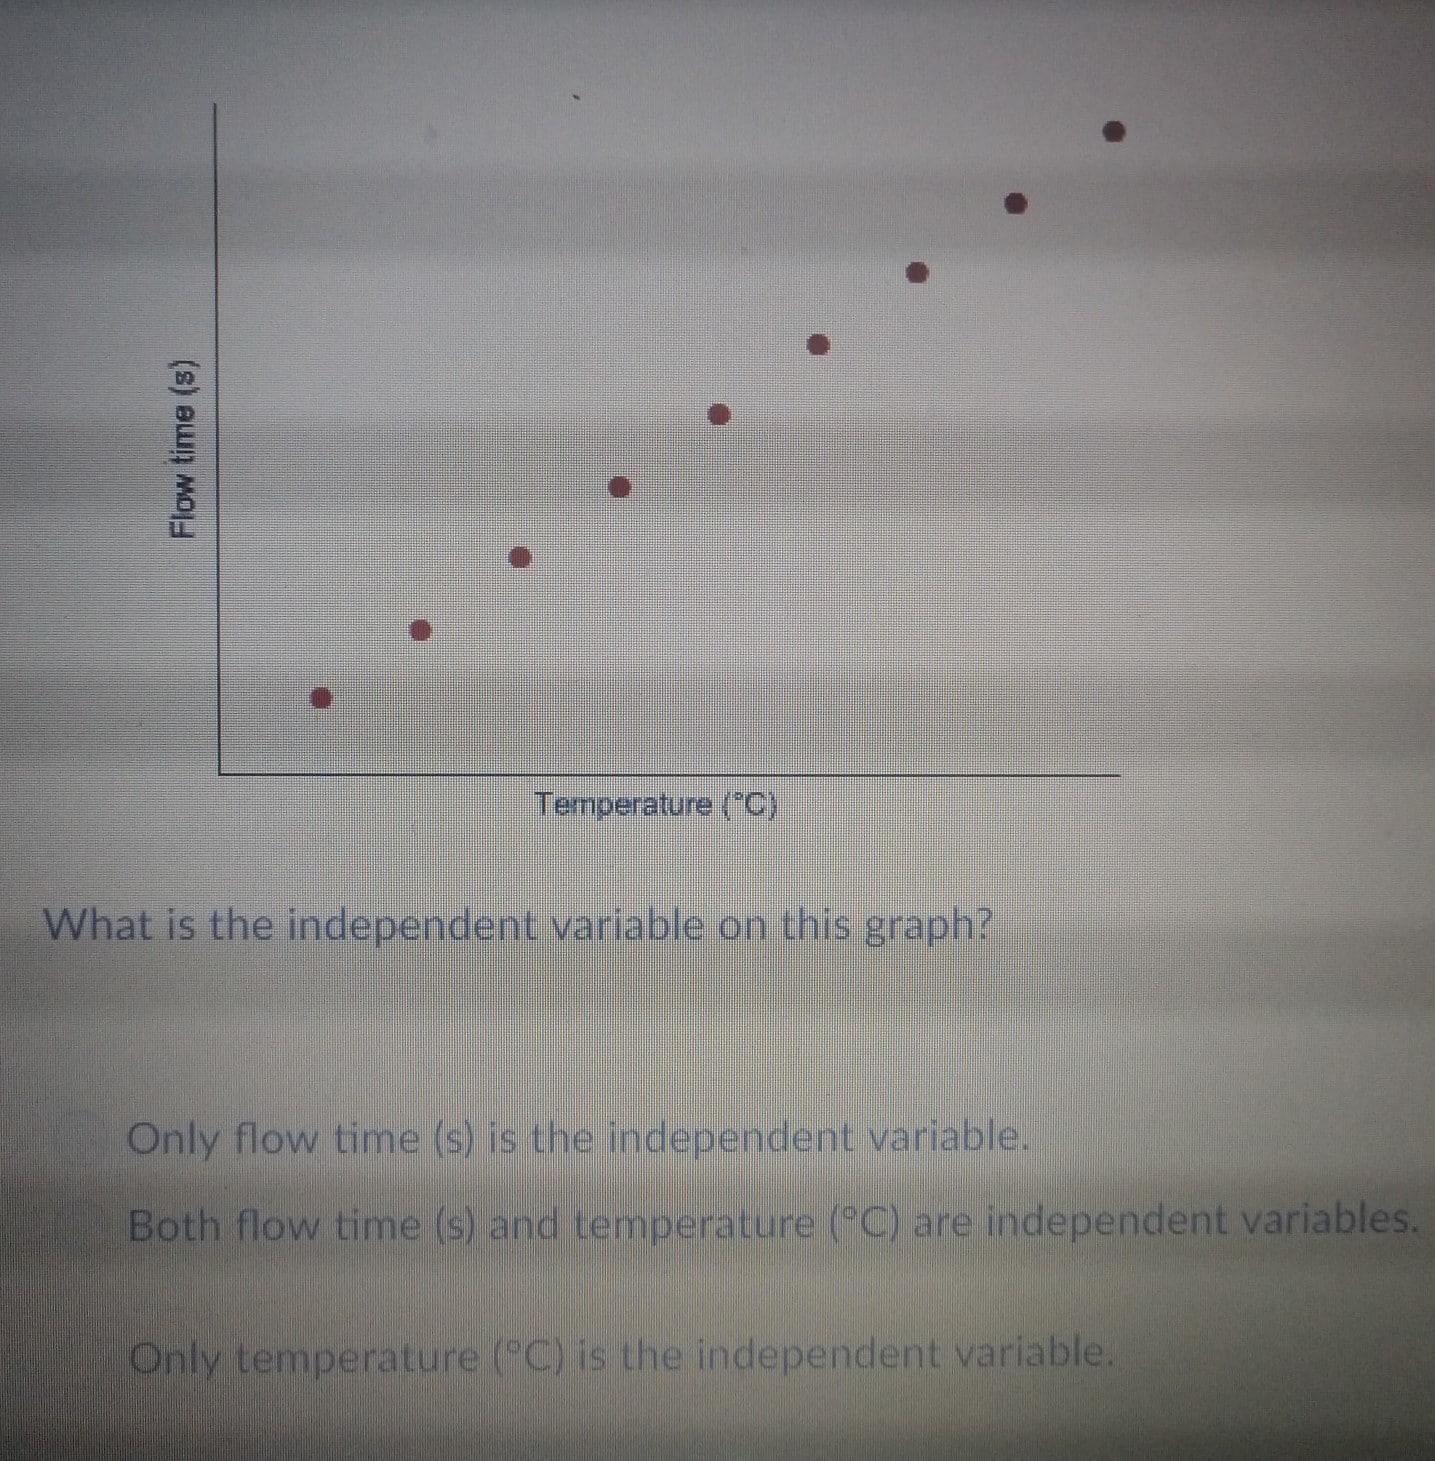 What is the independent variable on this graph?